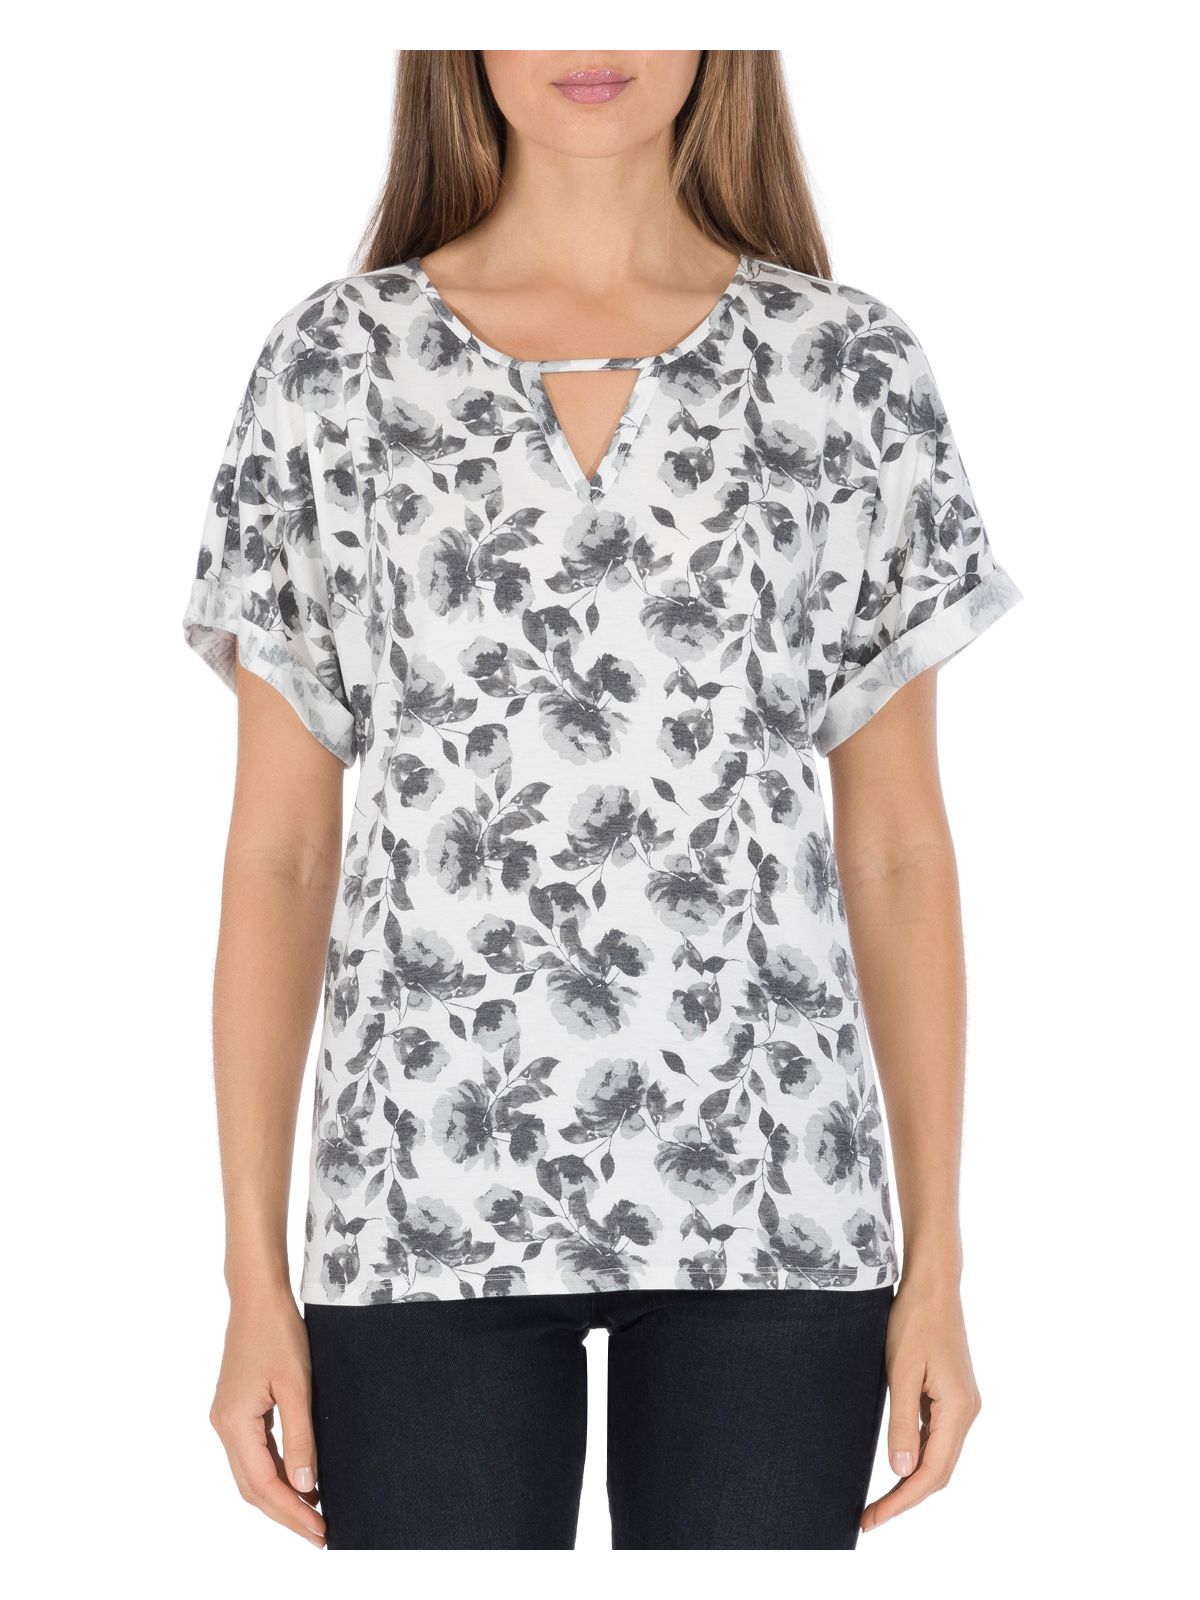 B COLLECTION Womens Gray Stretch Floral Keyhole Top S